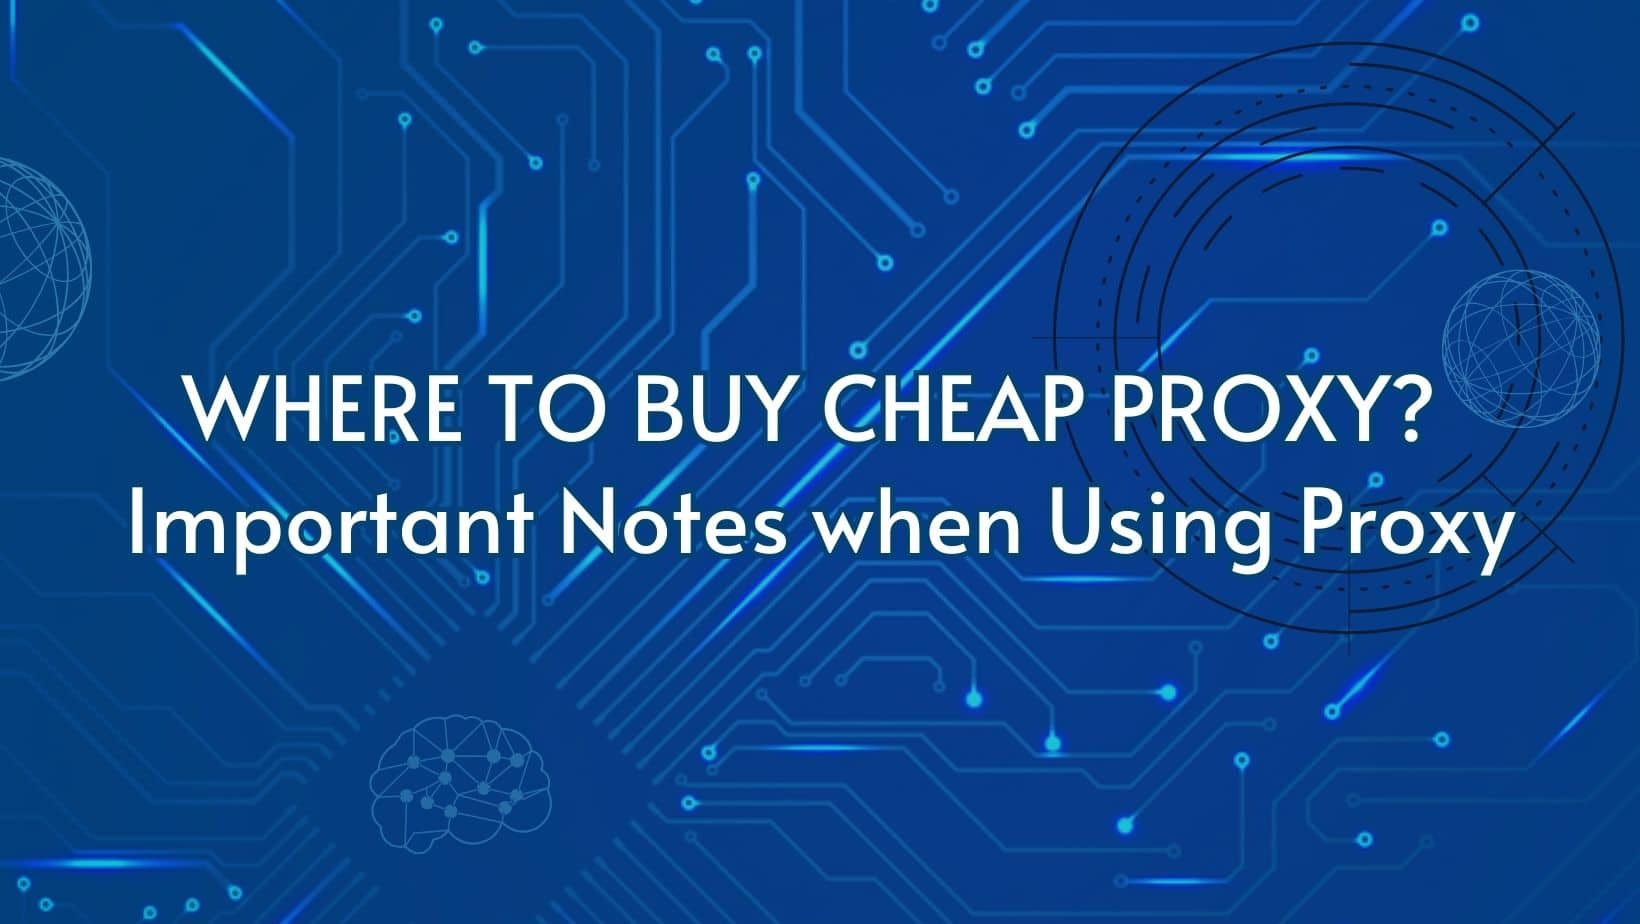 Where to buy cheap proxy? Important notes when using proxy